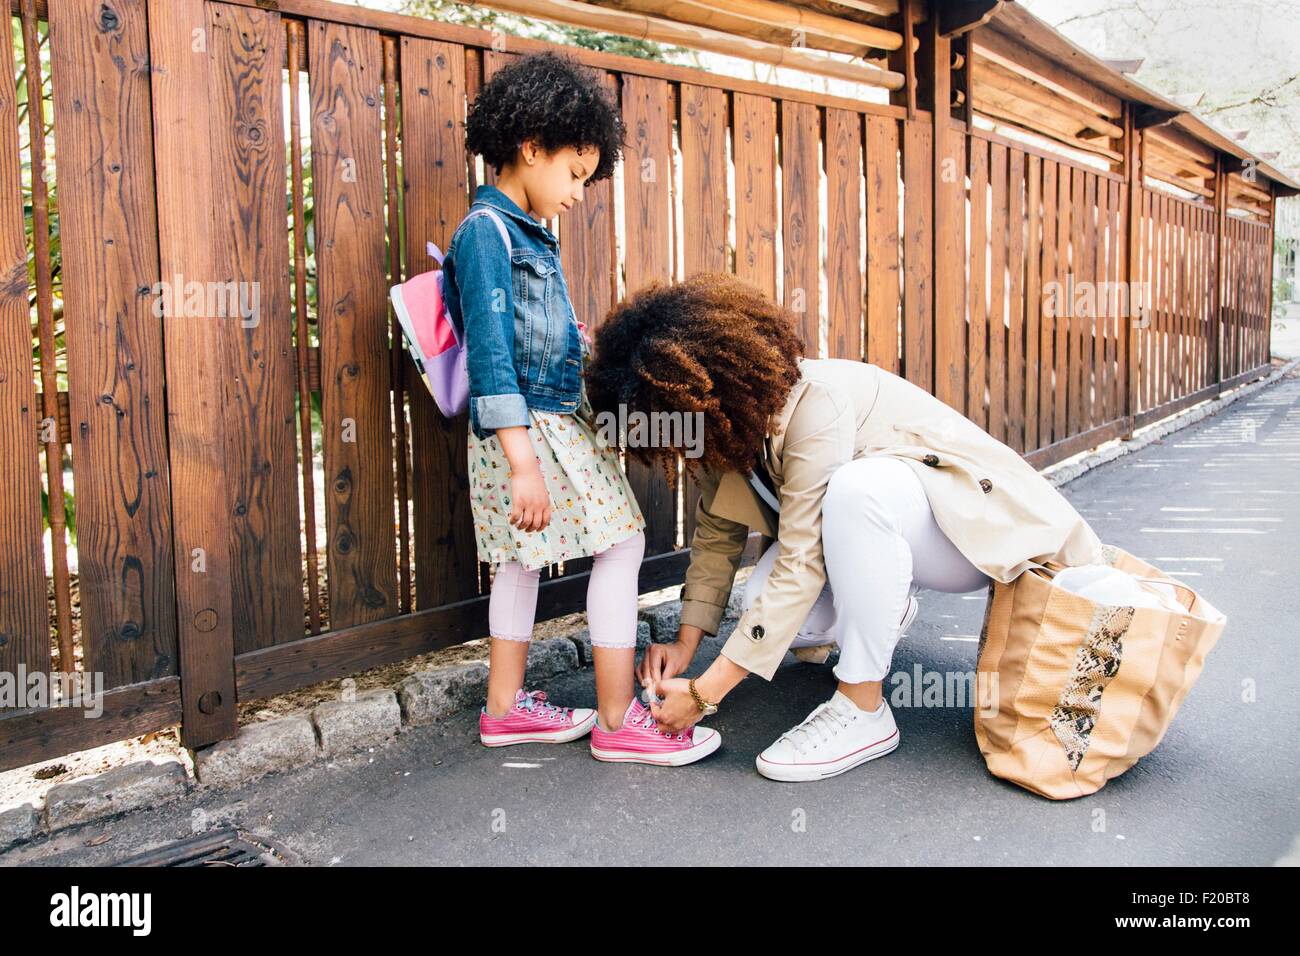 Mother kneeling by fence tying daughters shoelace Stock Photo